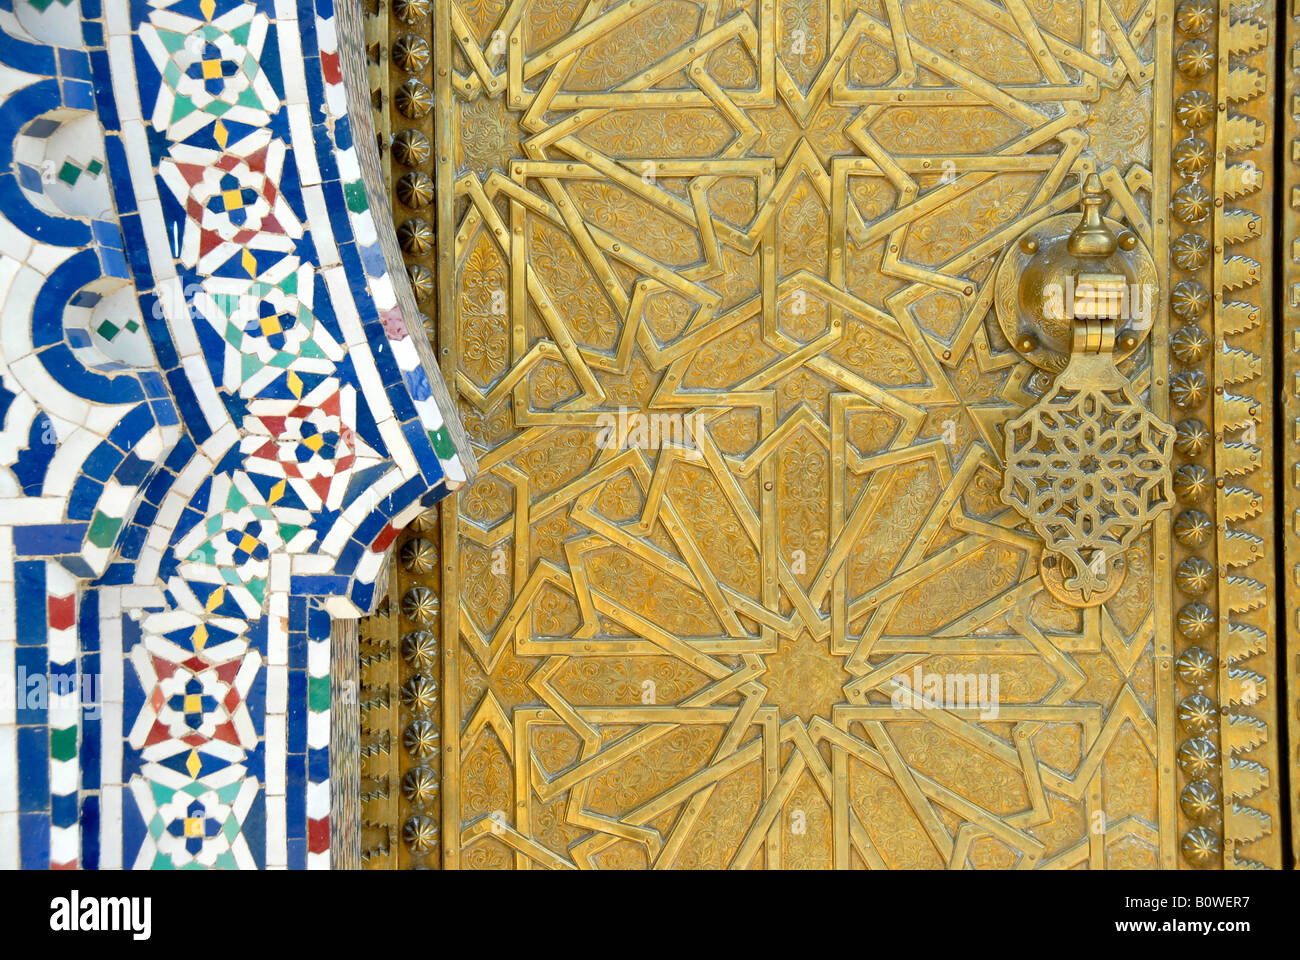 Ornate door, detail, royal palace in Fes or Fez, Morocco, North Africa Stock Photo